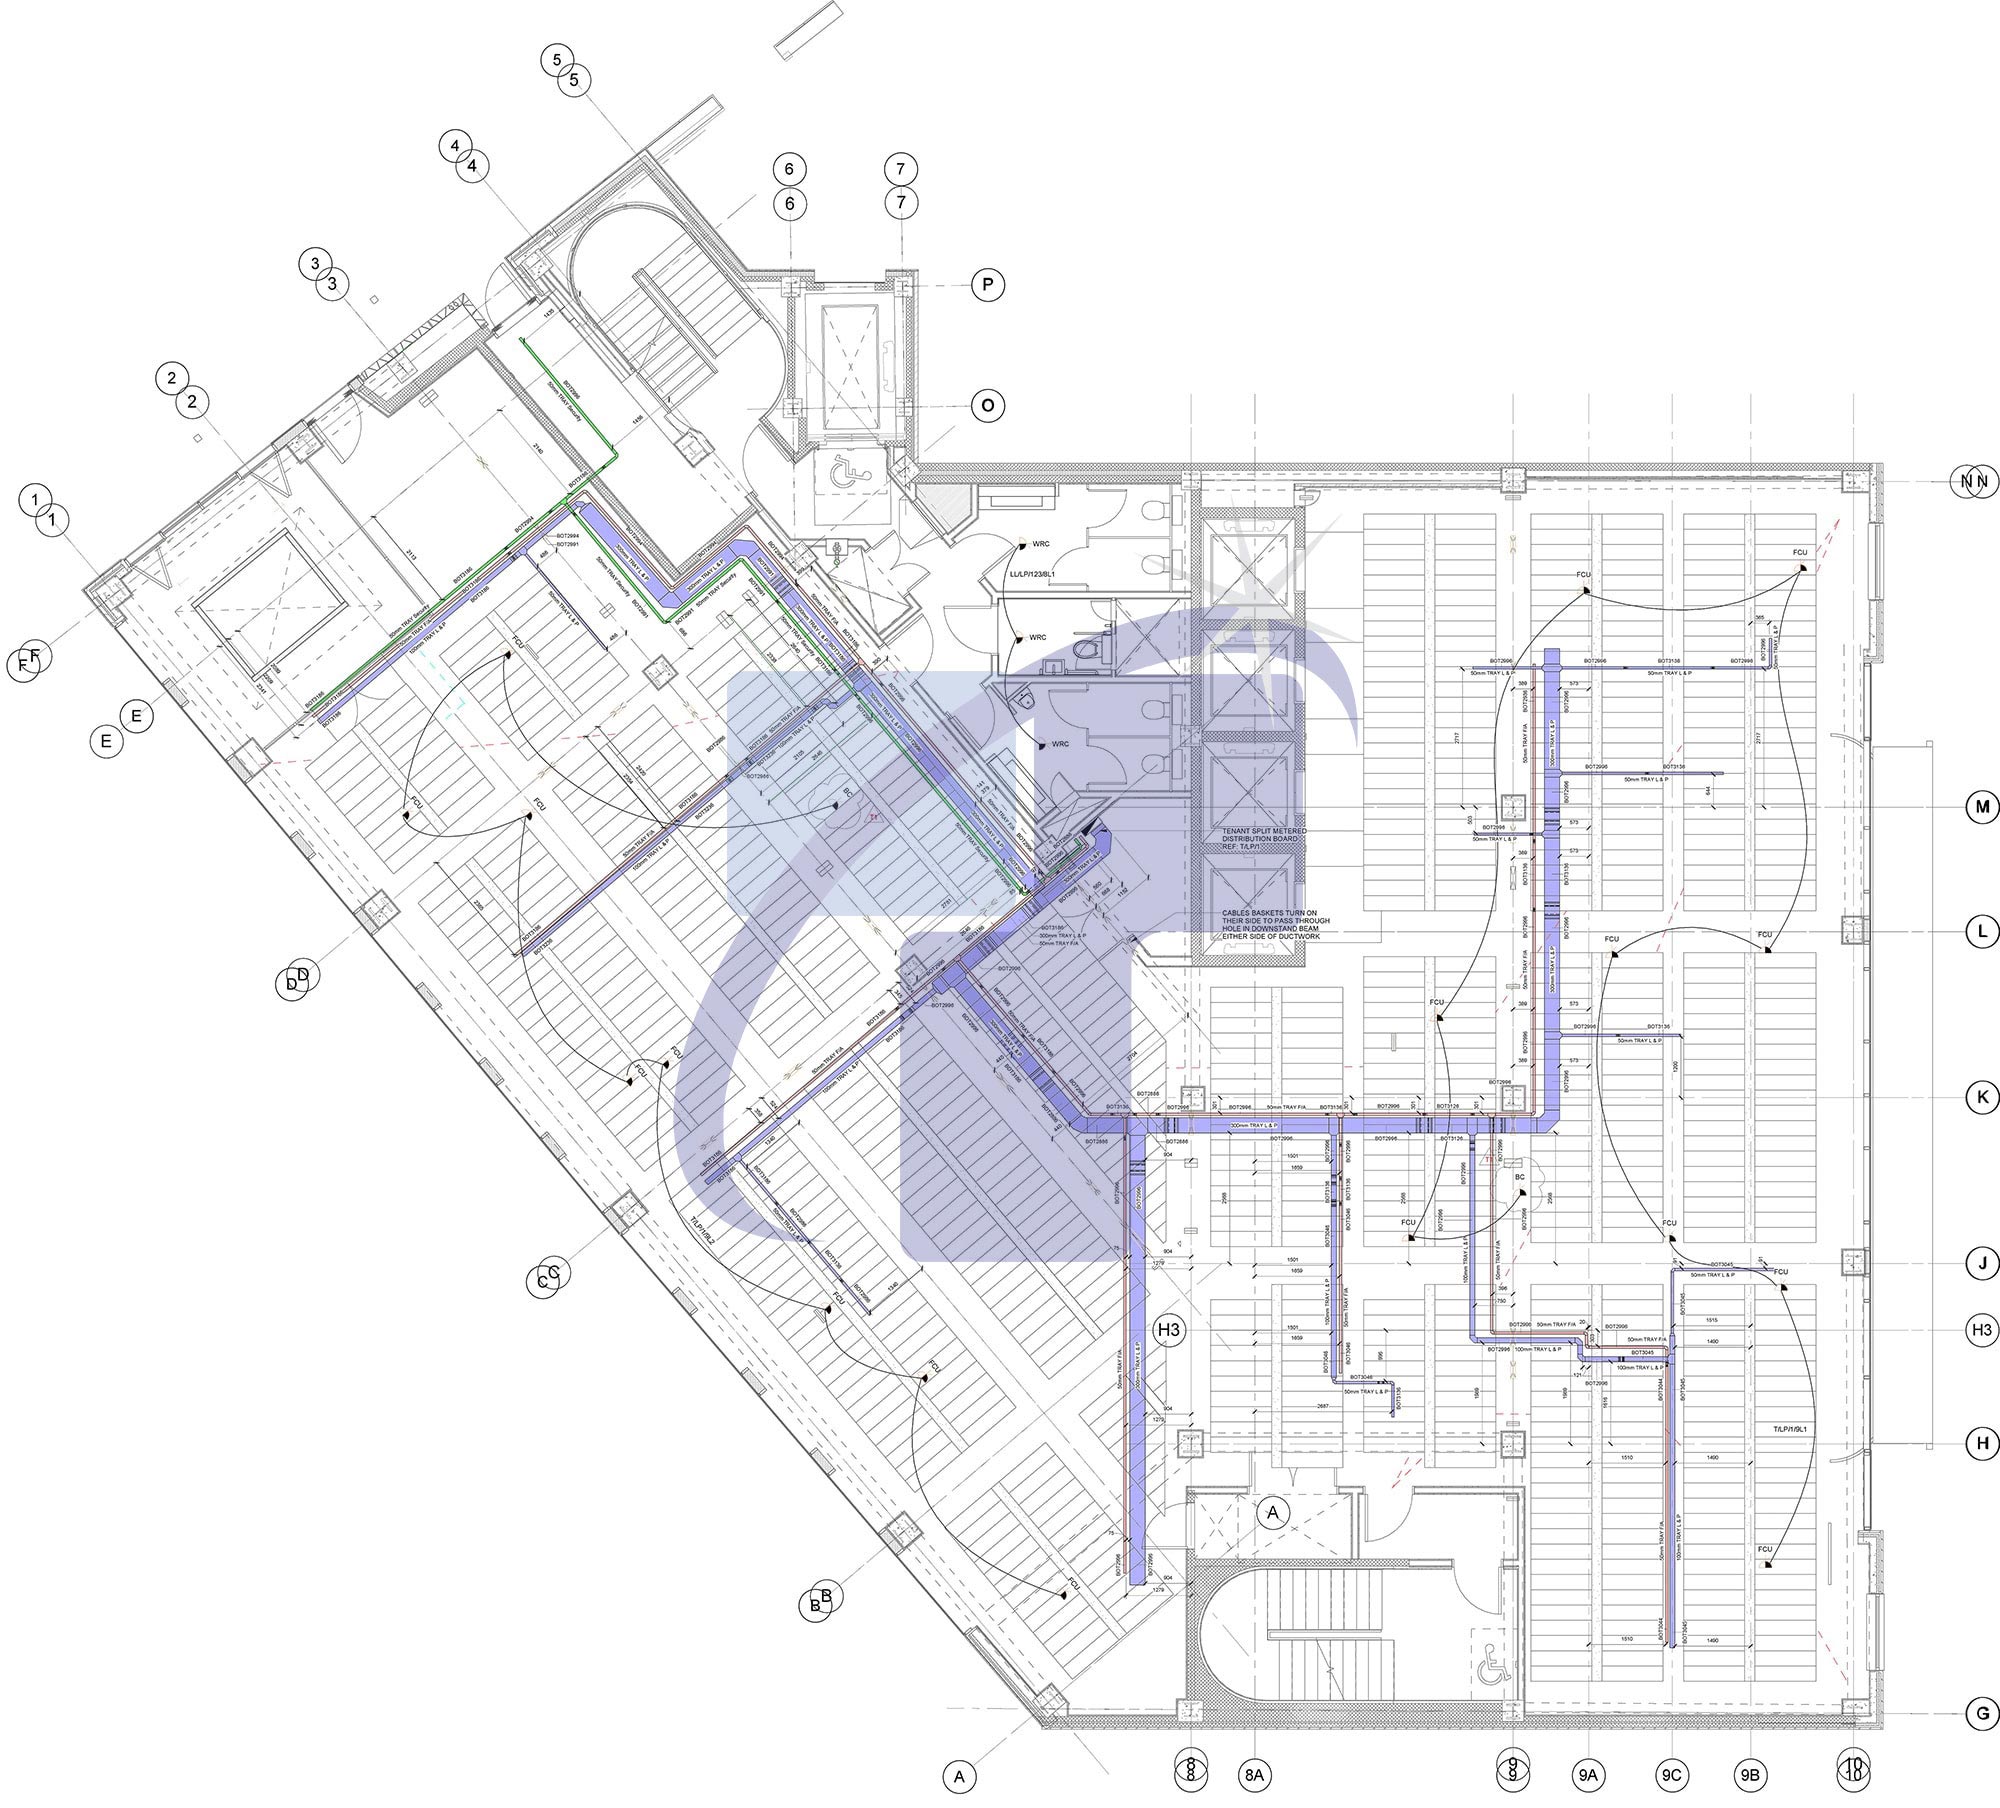 View our Samples for MEP Shop Drawing Services here